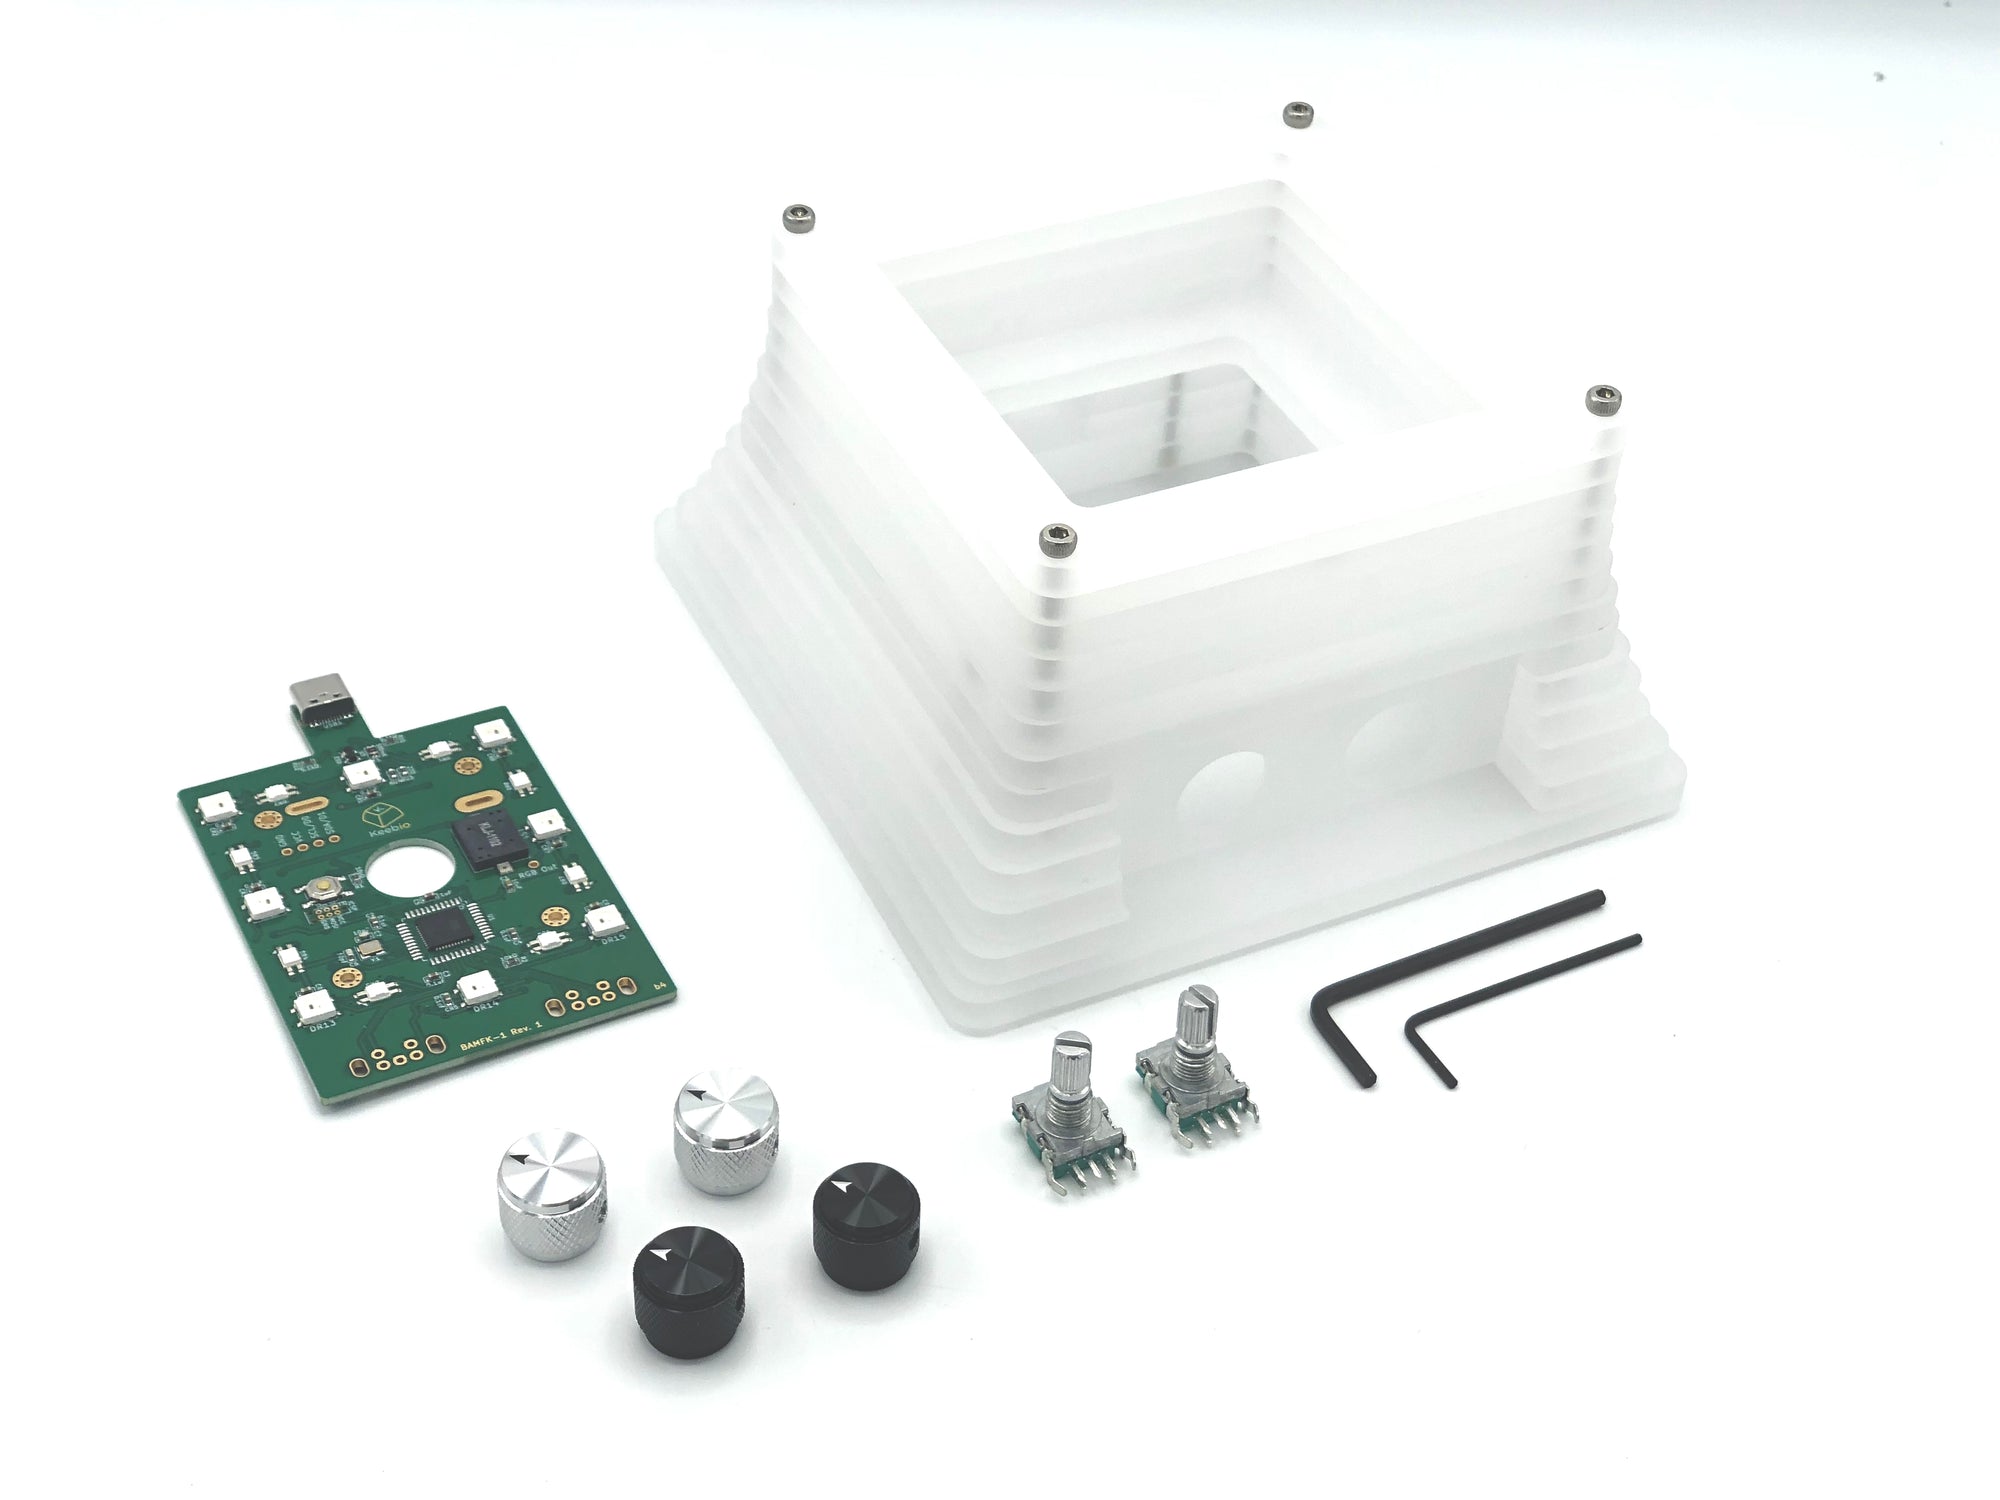 BAMFK-1 Acrylic Case and PCB Kit for Big Switch